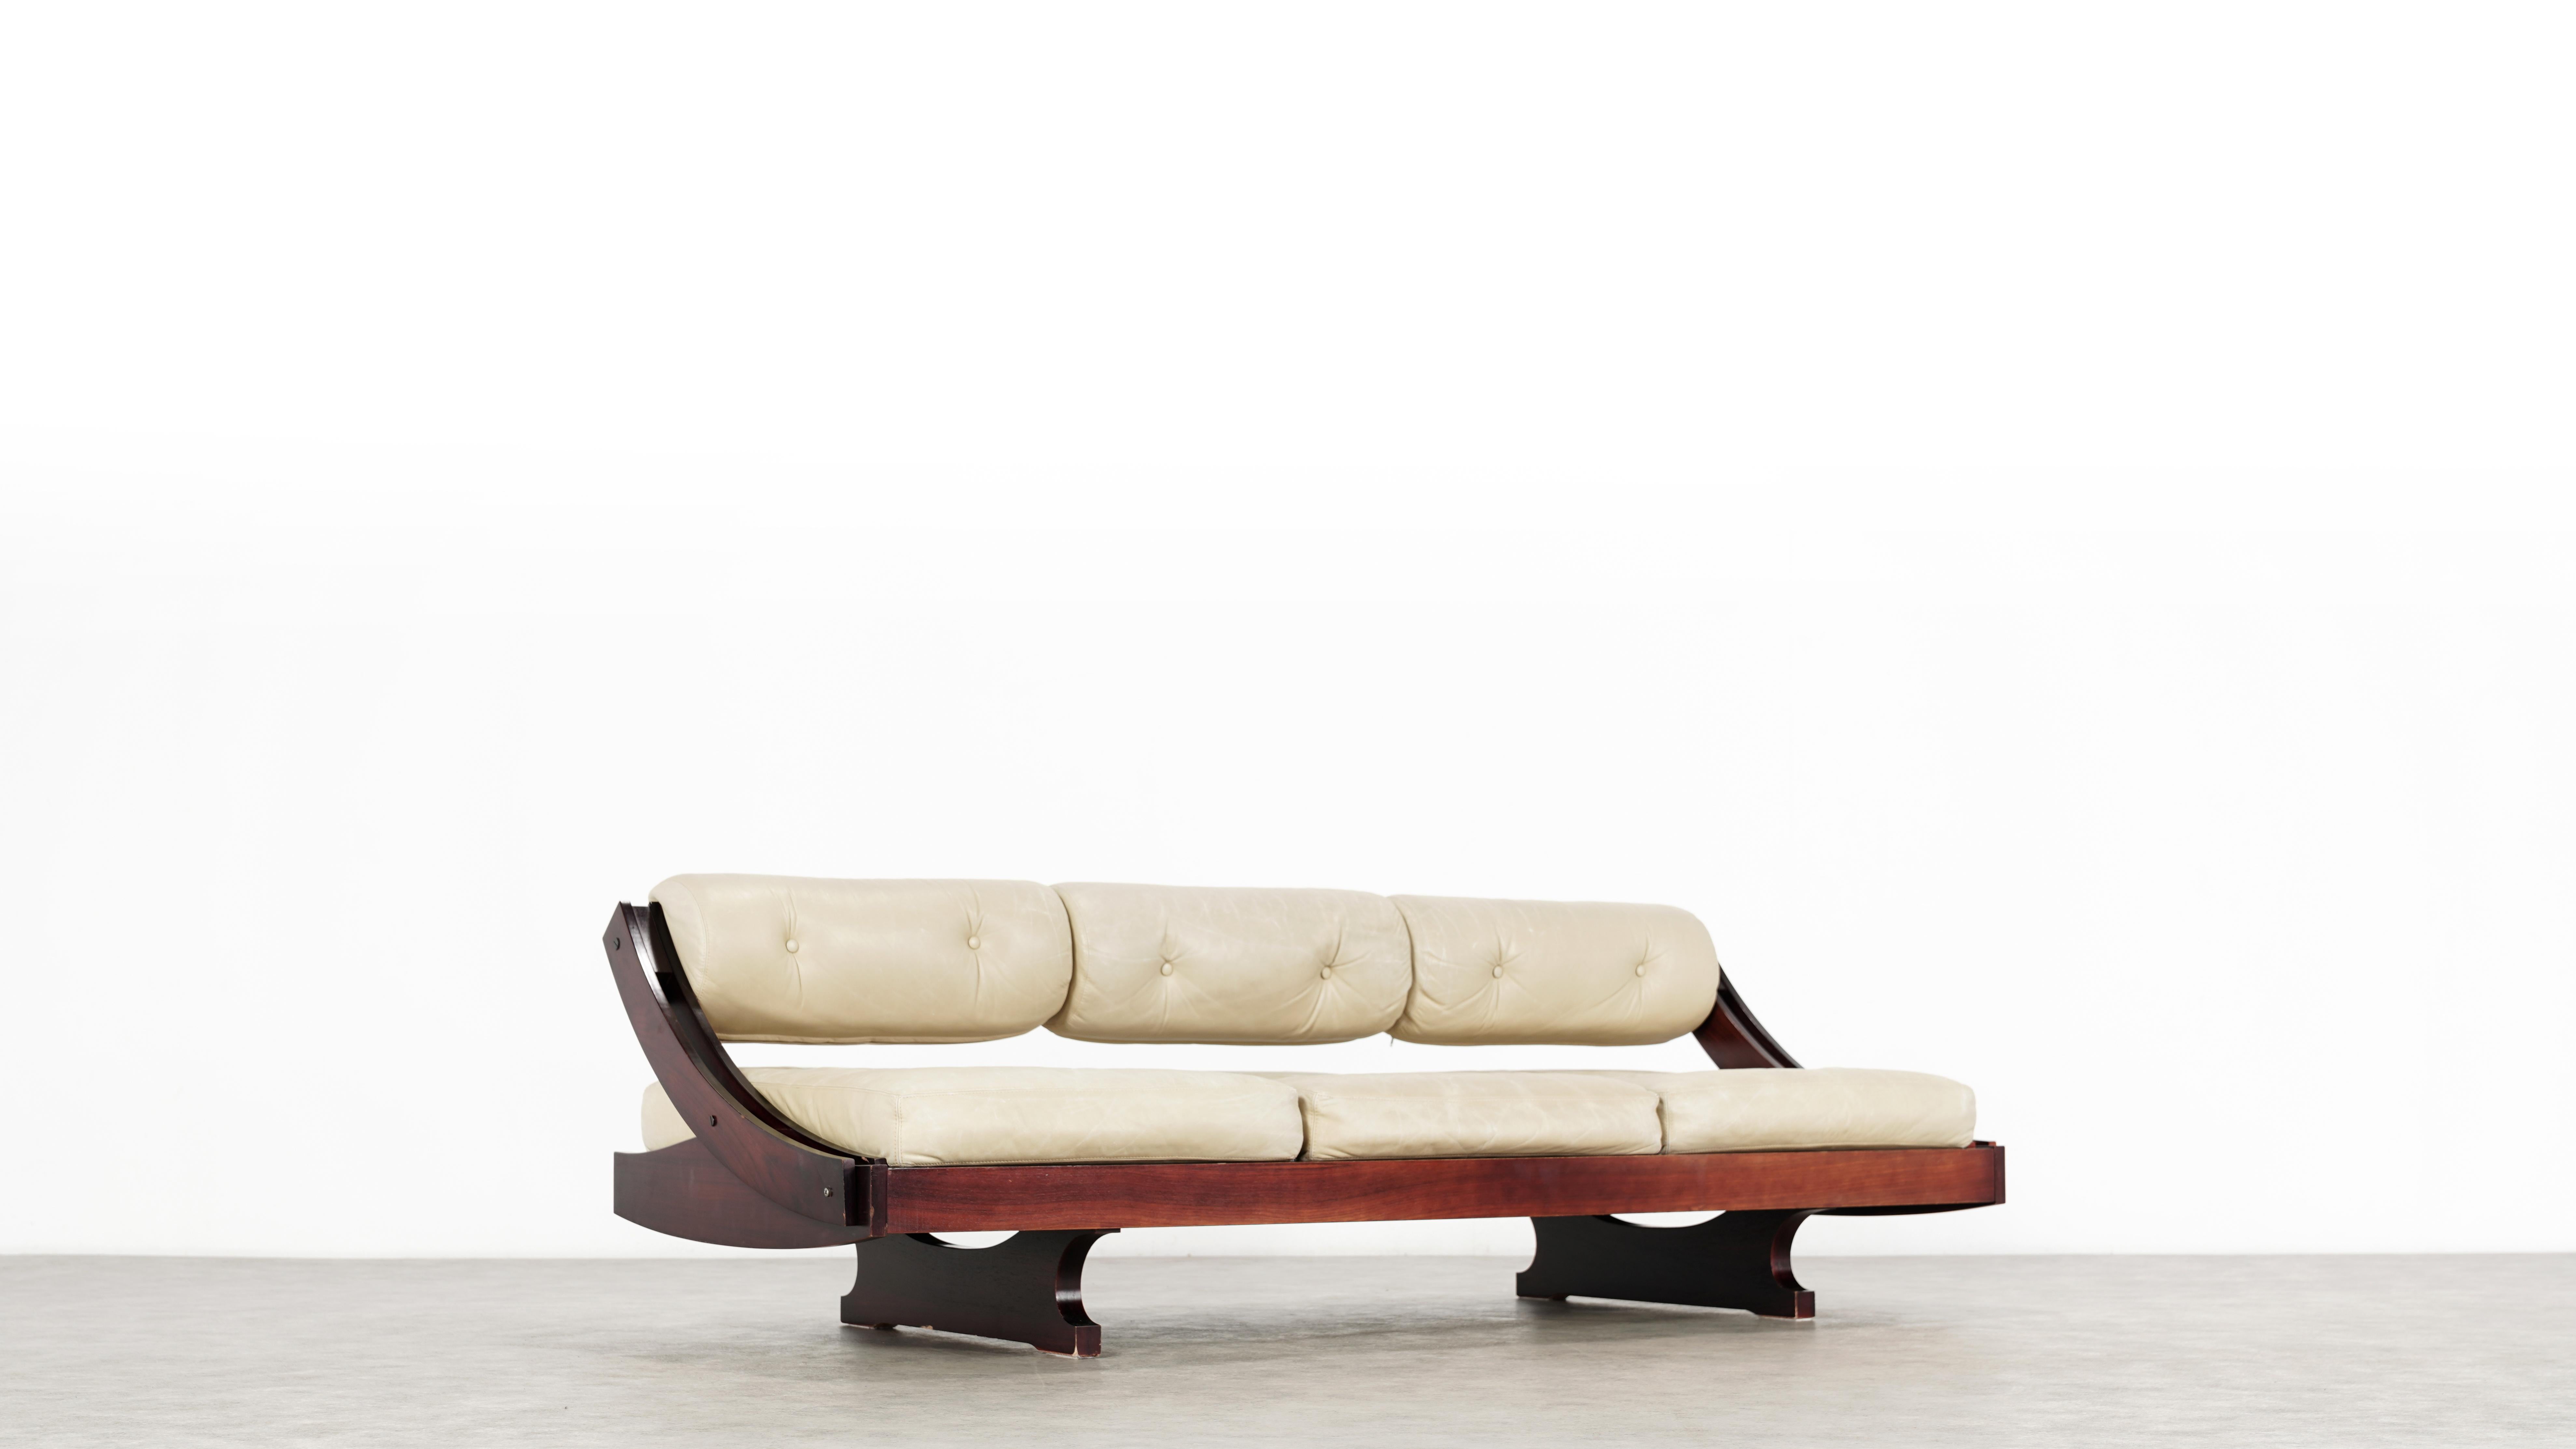 Italian Gianni Songia, Daybed GS 195 and Sofa, 1963 for Sormani, Handmade in Italy